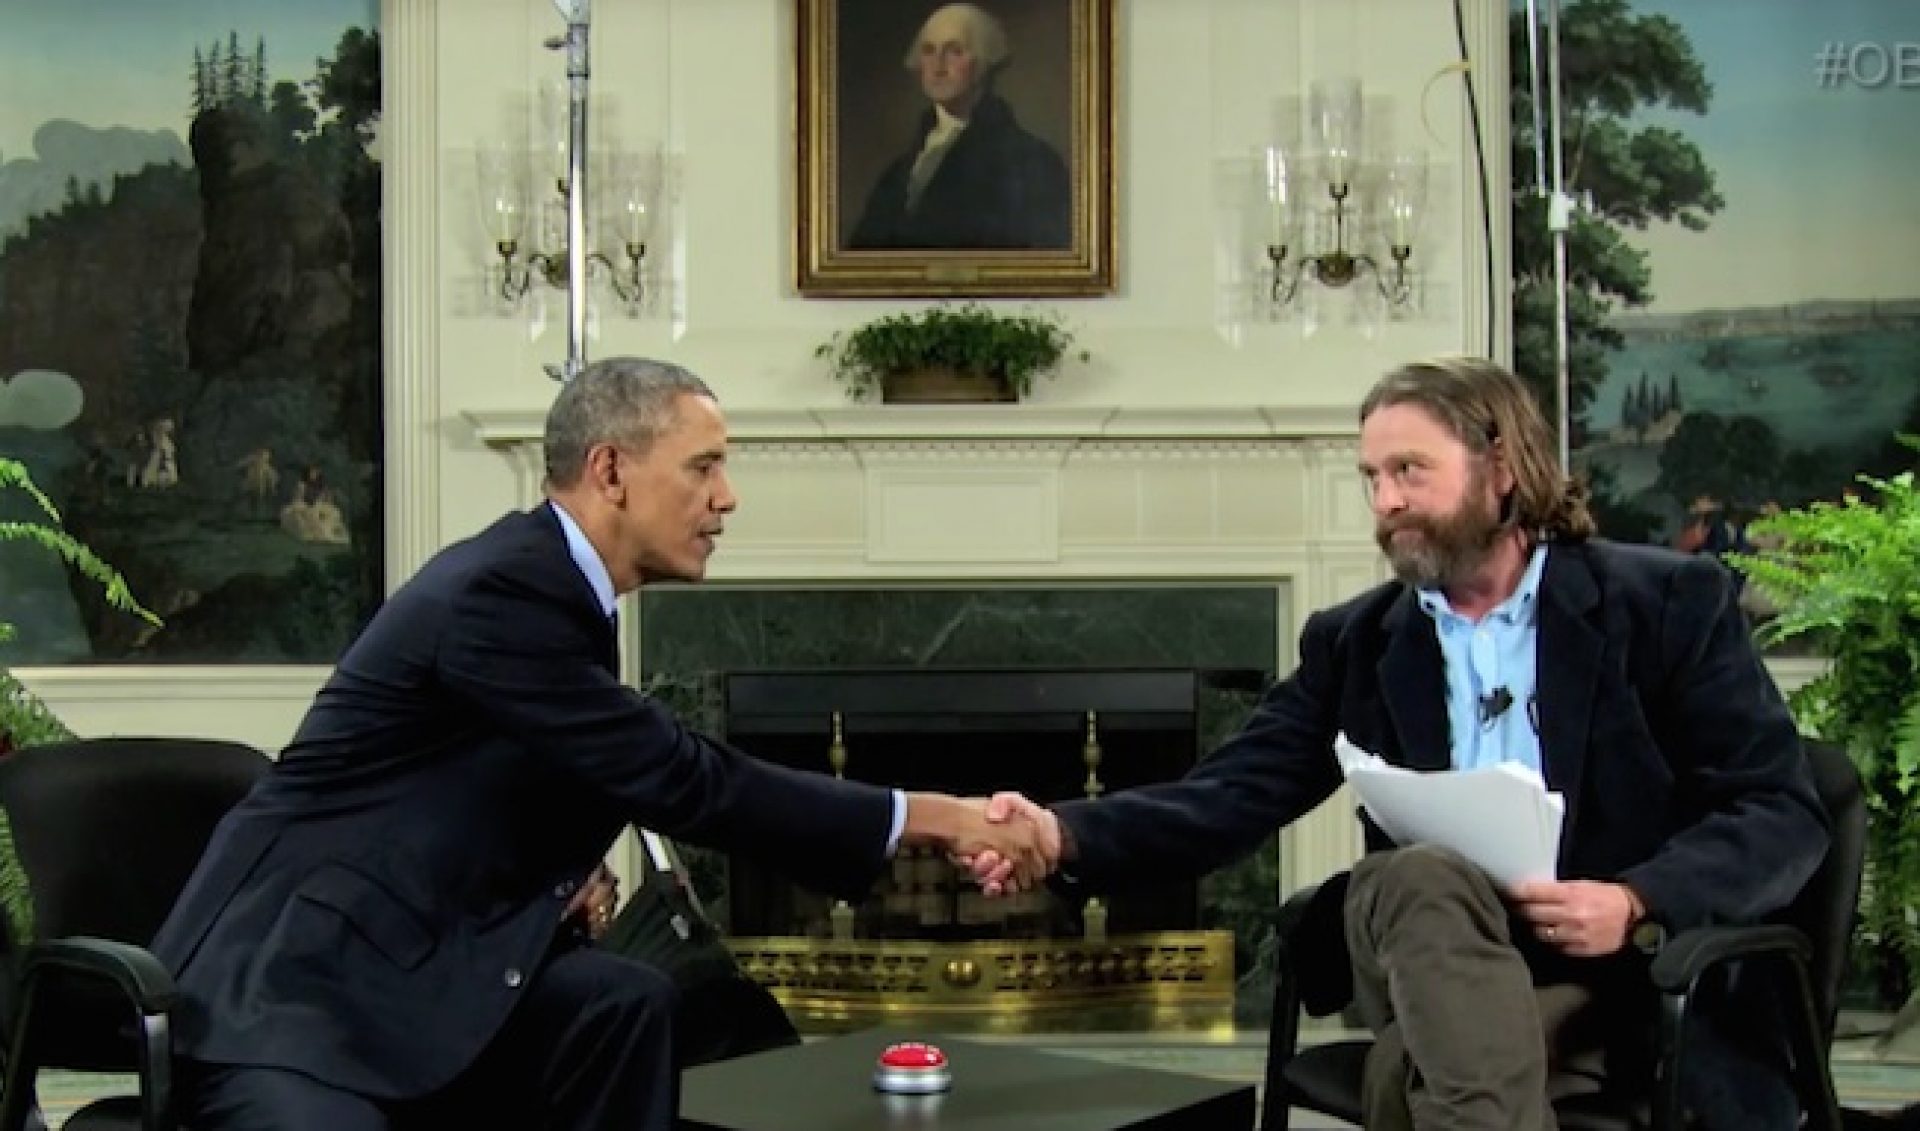 Obama, Galifianakis, Funny Or Die Now Top Referrers To Healthcare.gov